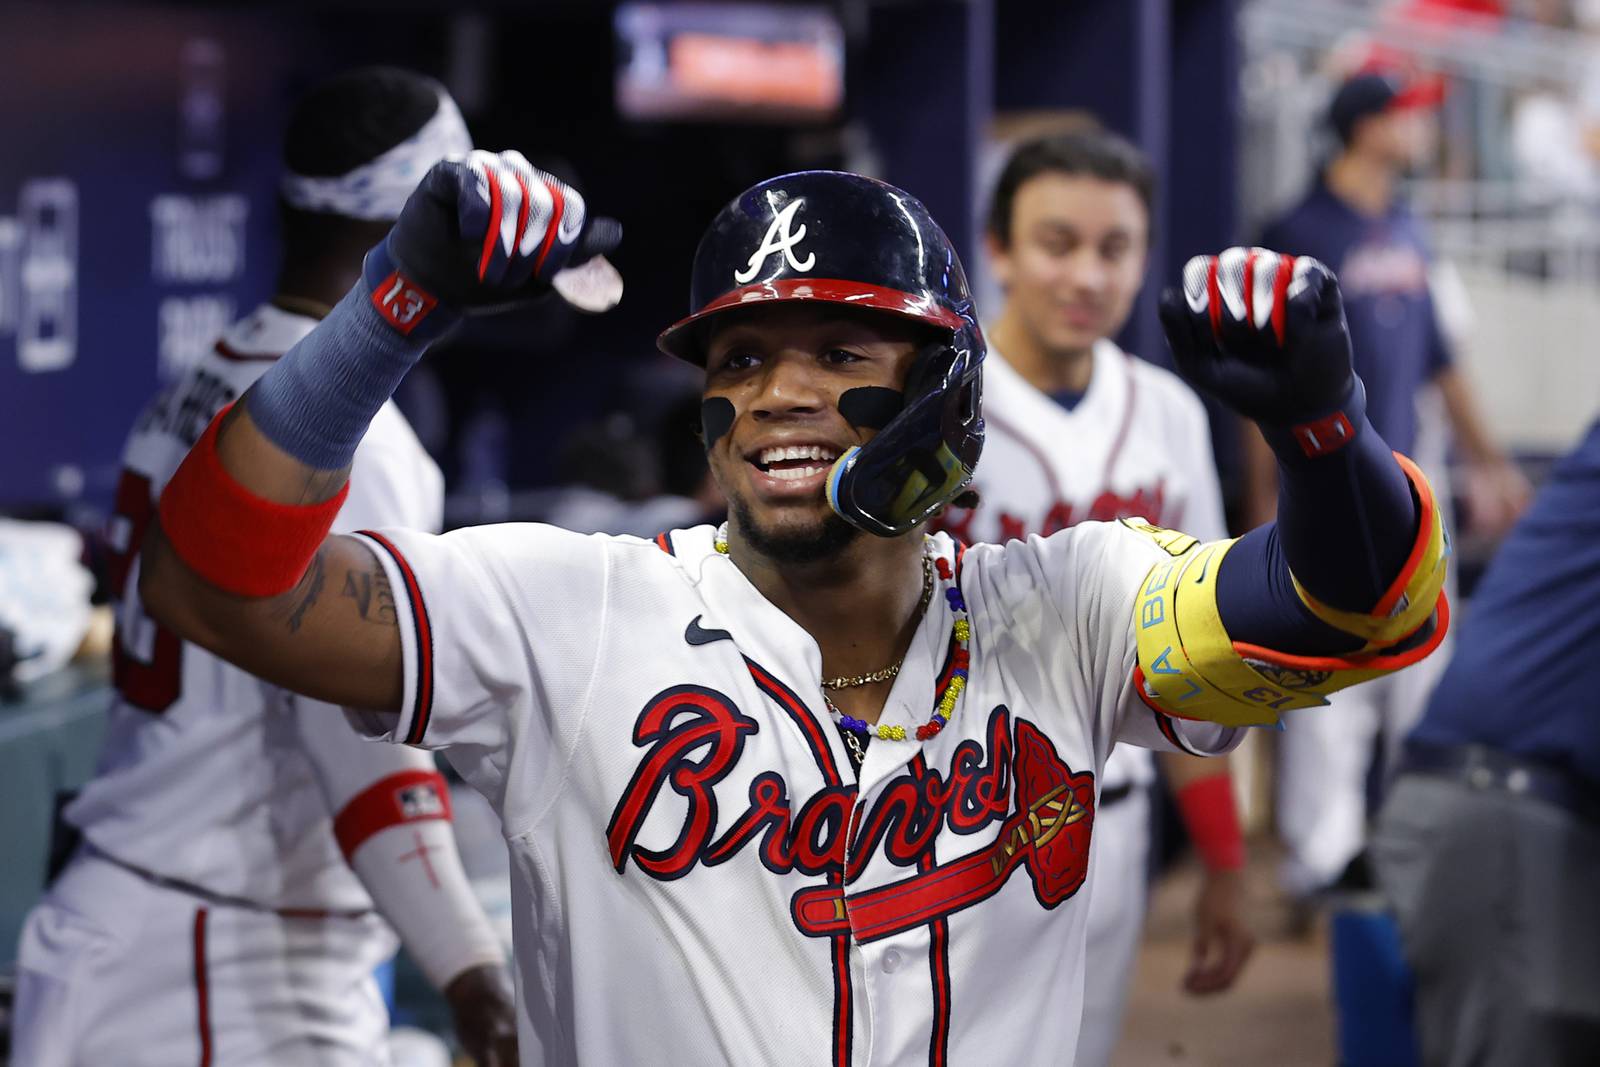 Single game Atlanta Braves playoff tickets go on sale today. Here’s